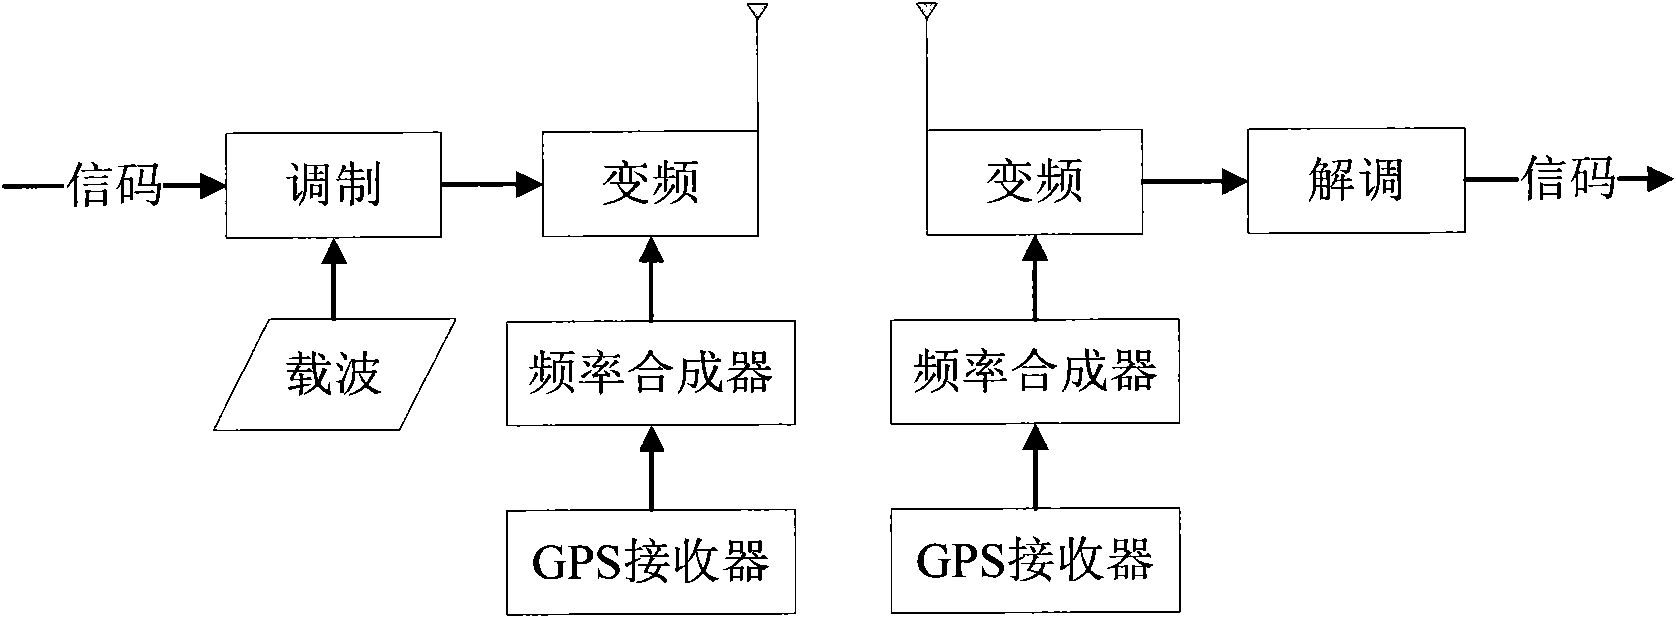 Chaotic synchronous realizing method based on GPS